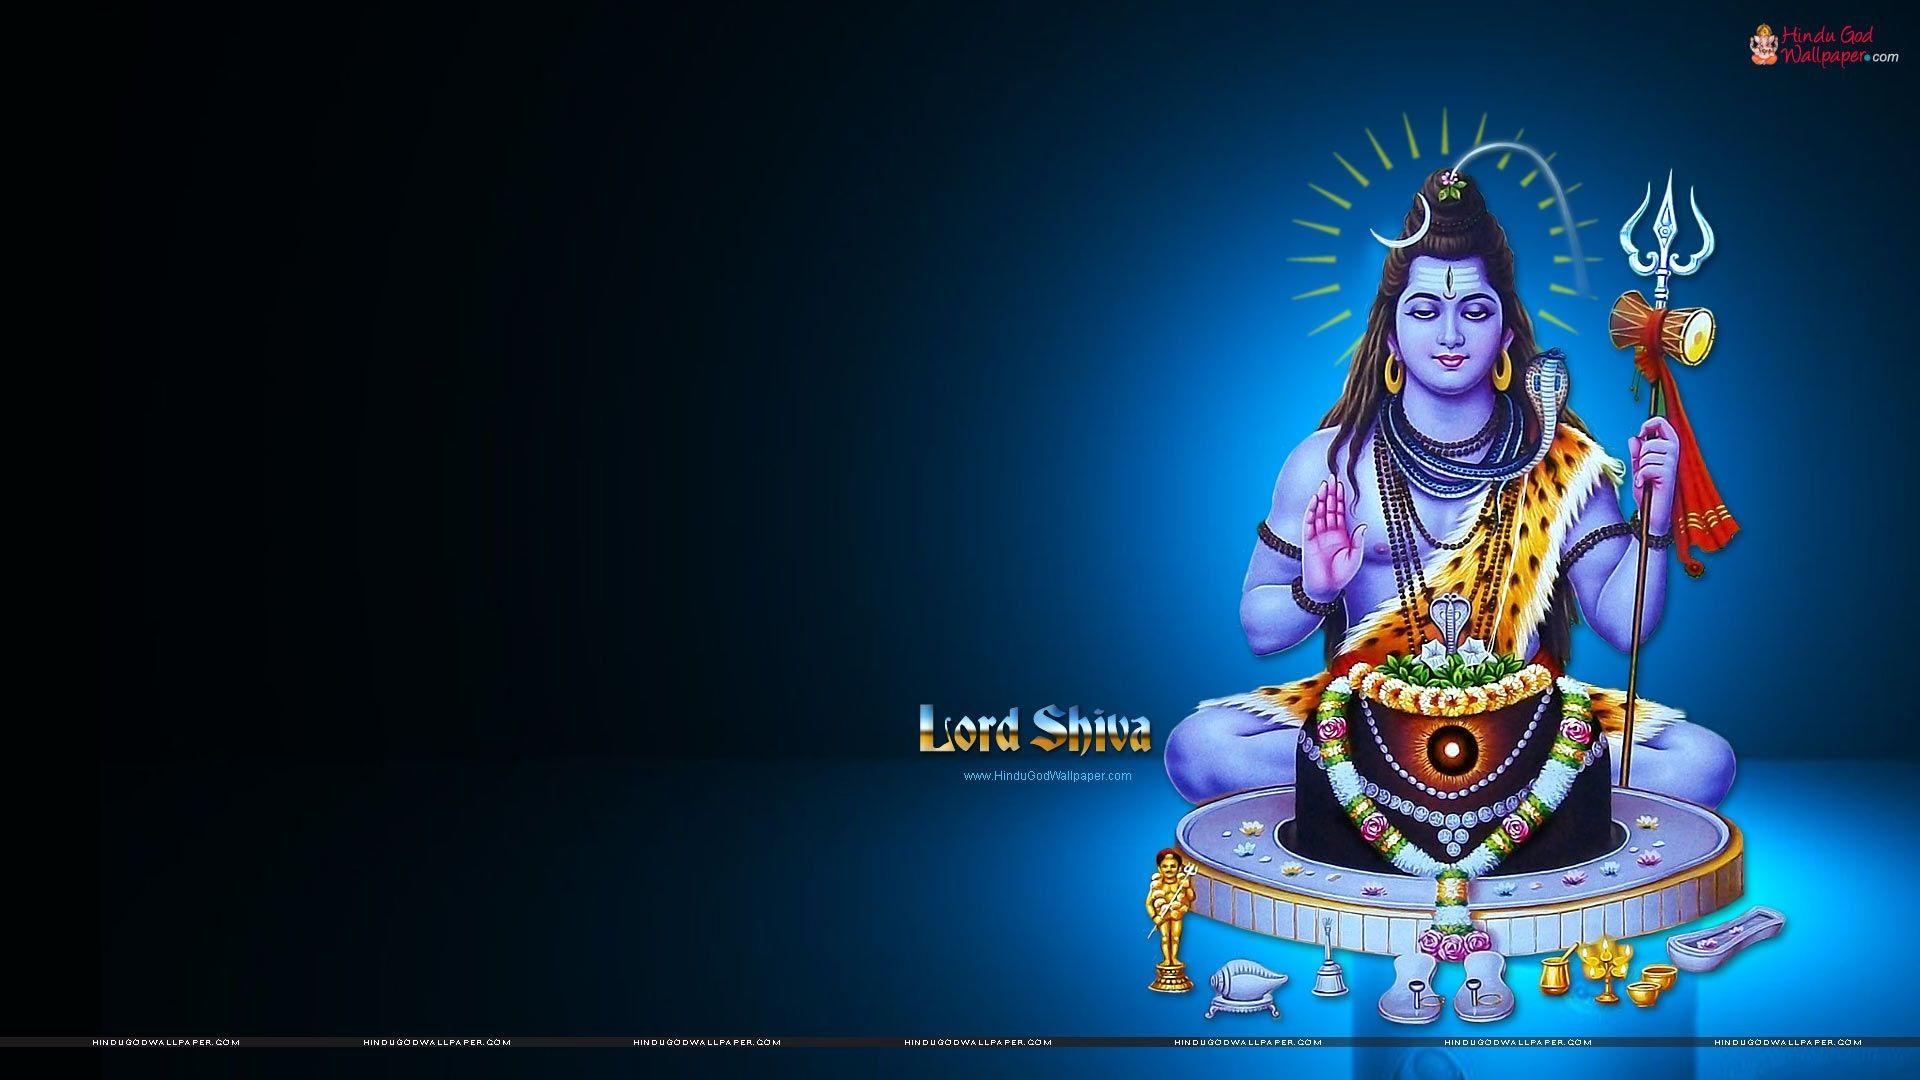 Lord Shiva Wallpaper background picture